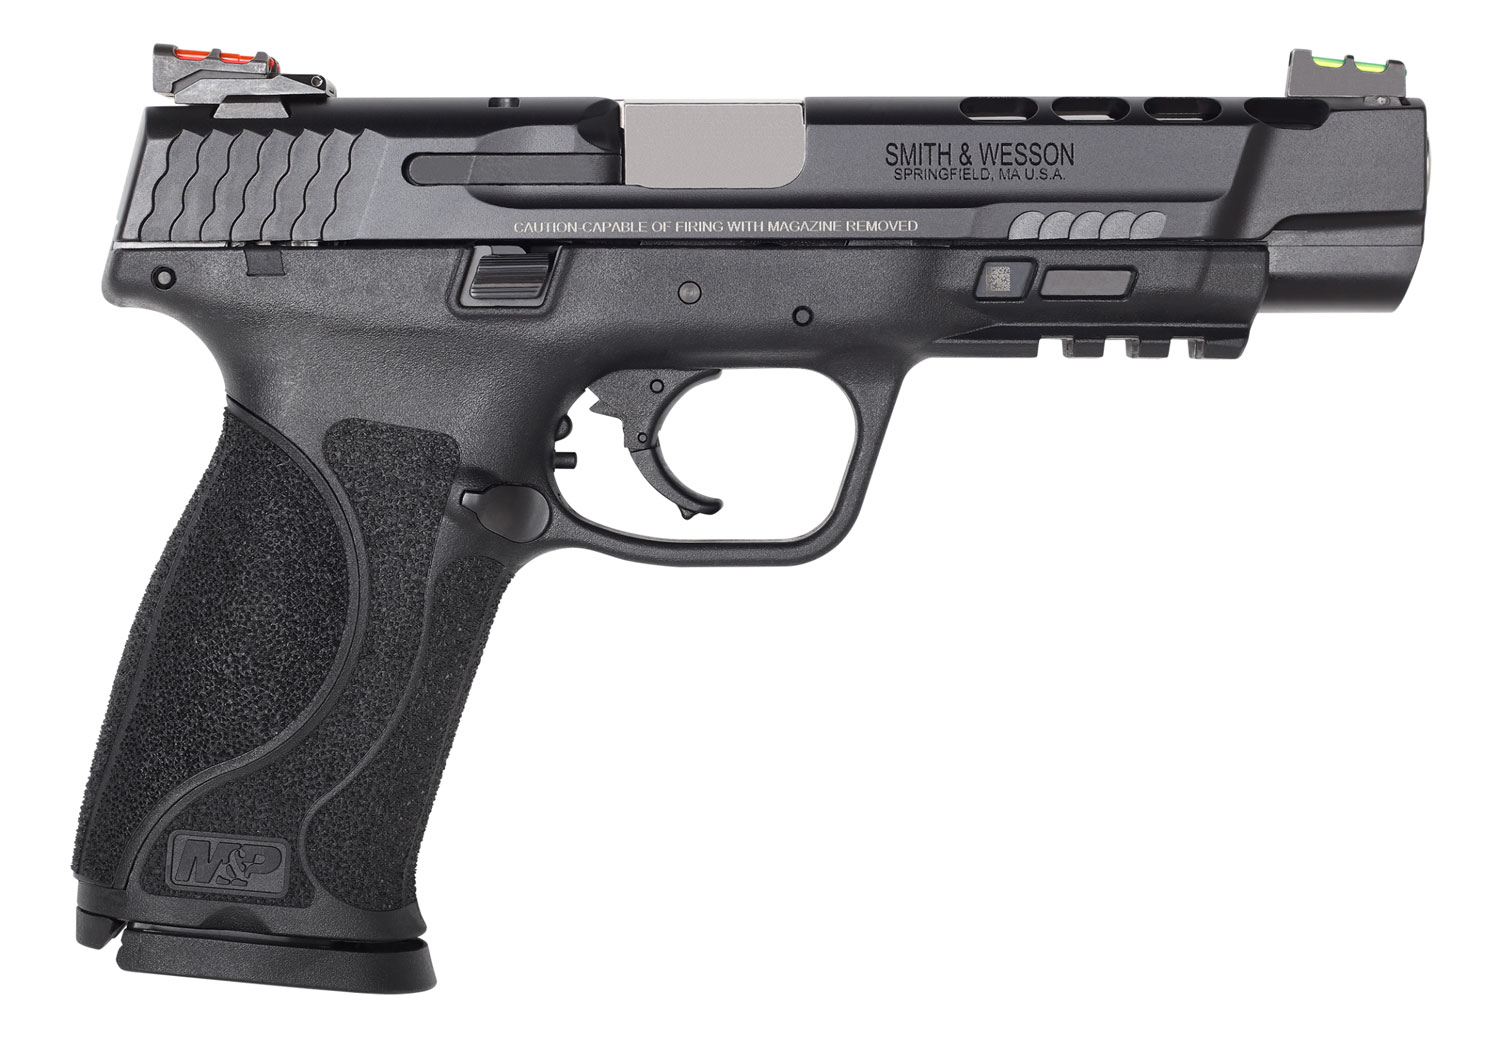 Smith & Wesson 11824 Performance Center M&P M2.0 9mm Luger 5